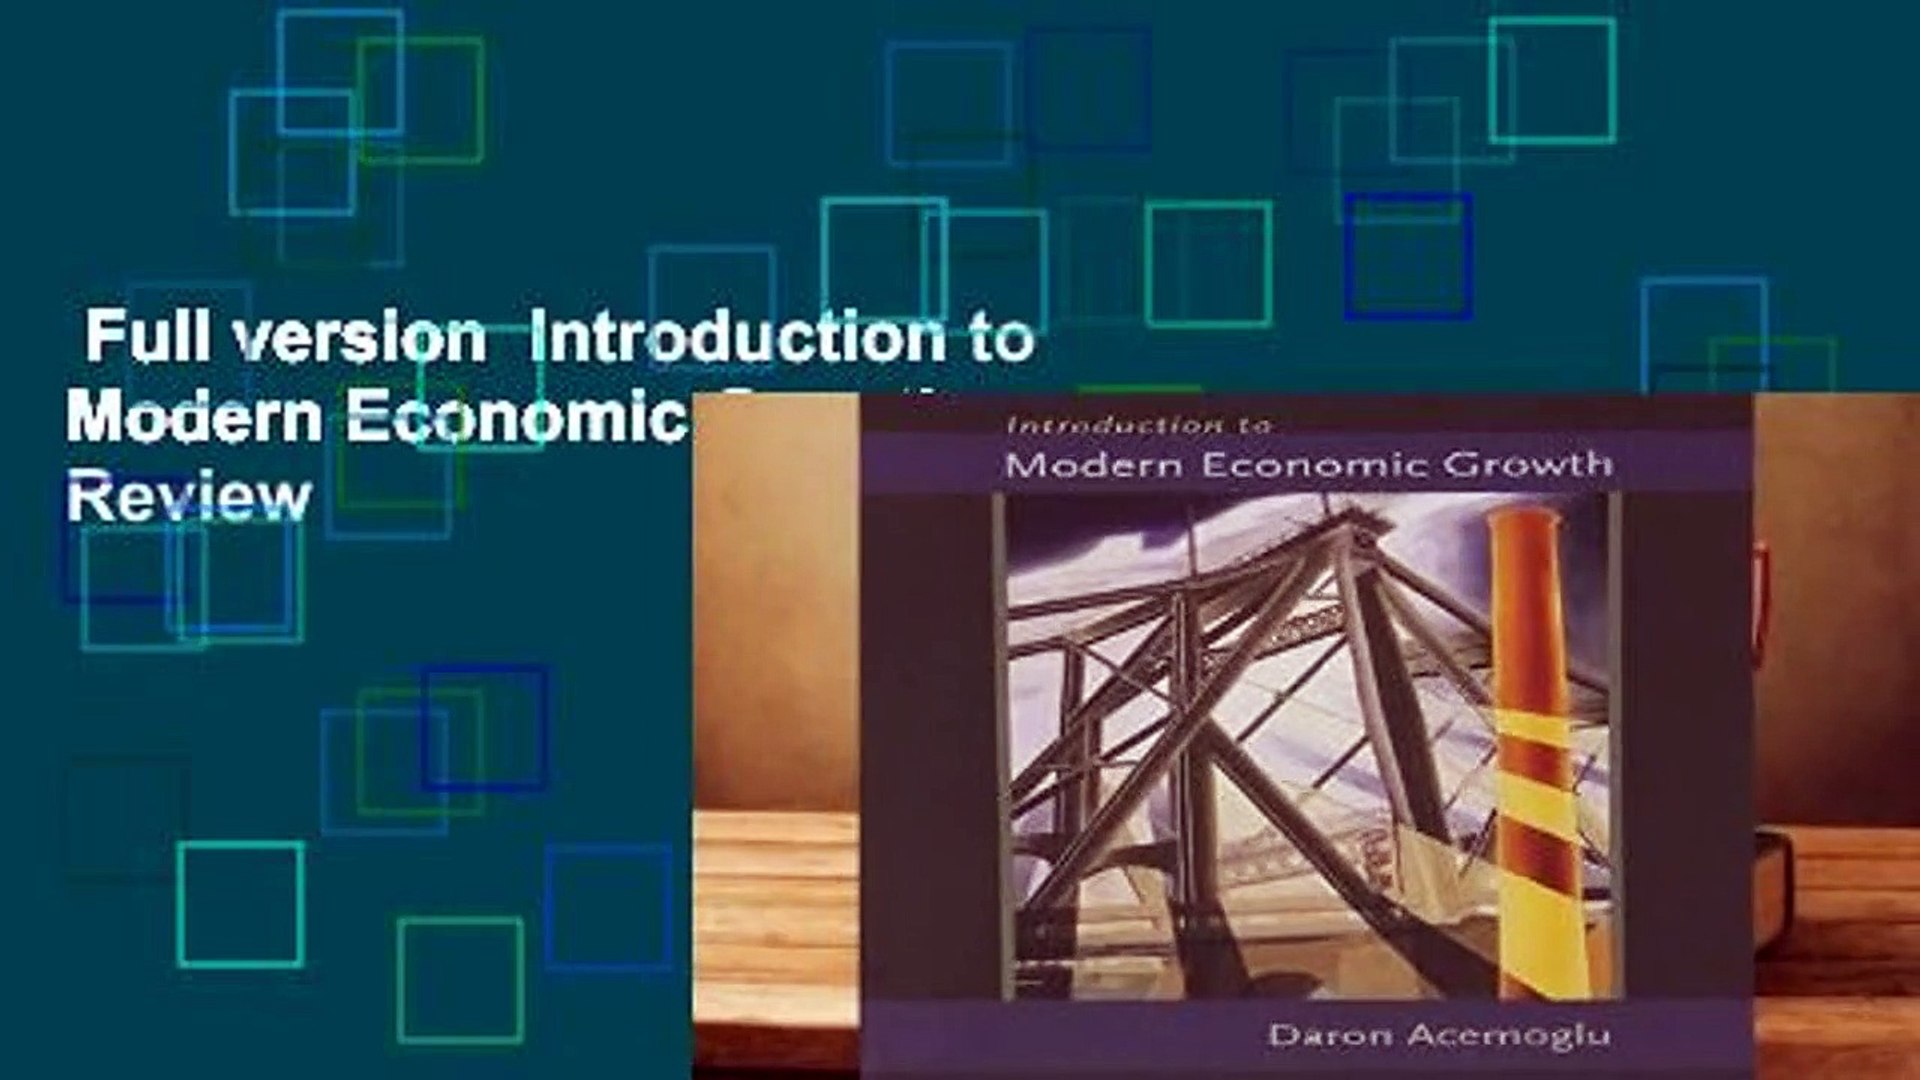 Full version Introduction to Modern Economic Growth Review